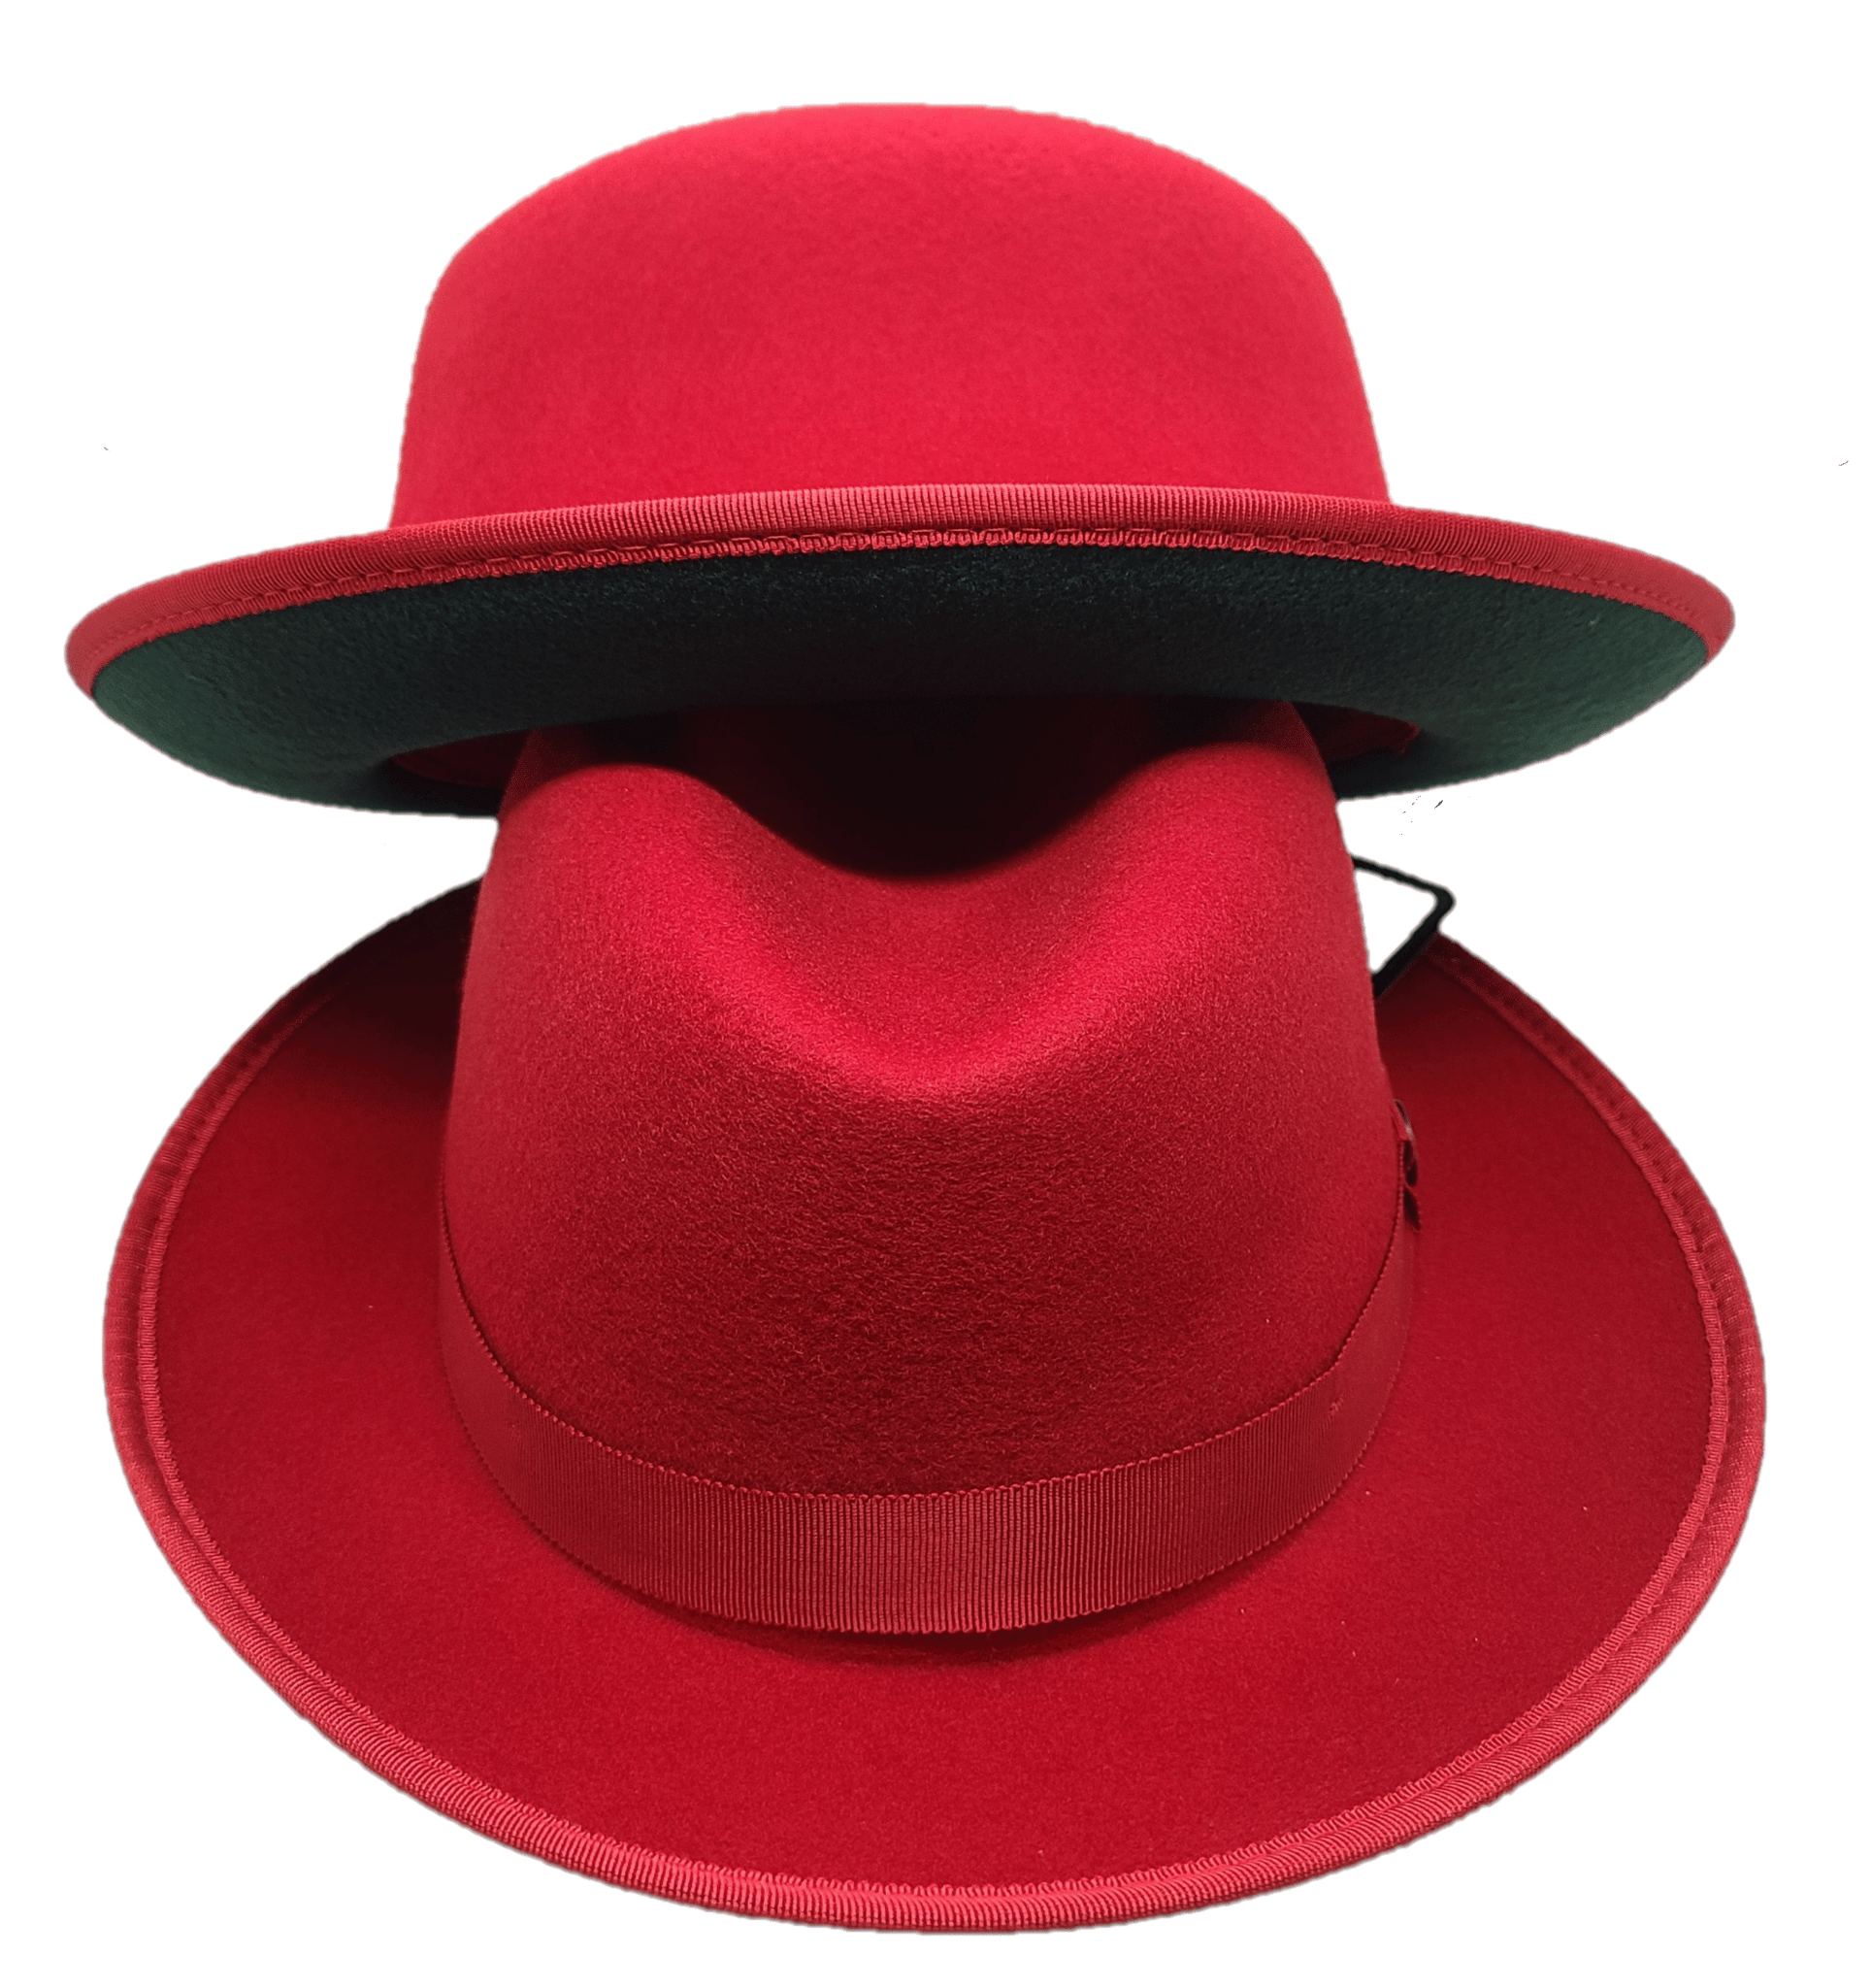 Australian Wool Hat - The Princeton Red/Green - Classic fedora-style hat for men and women